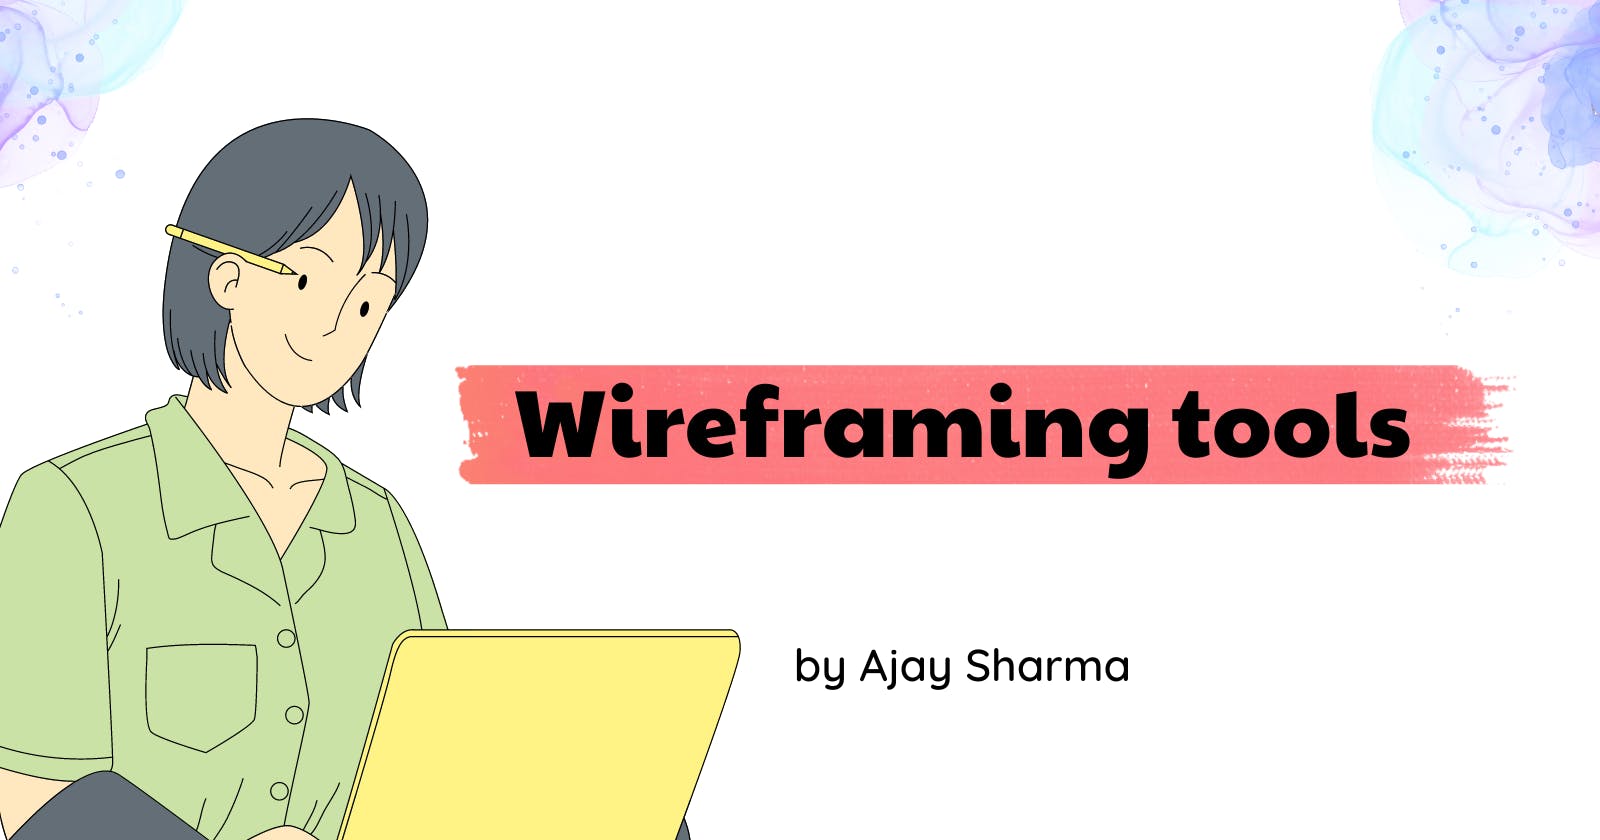 Wireframing tools